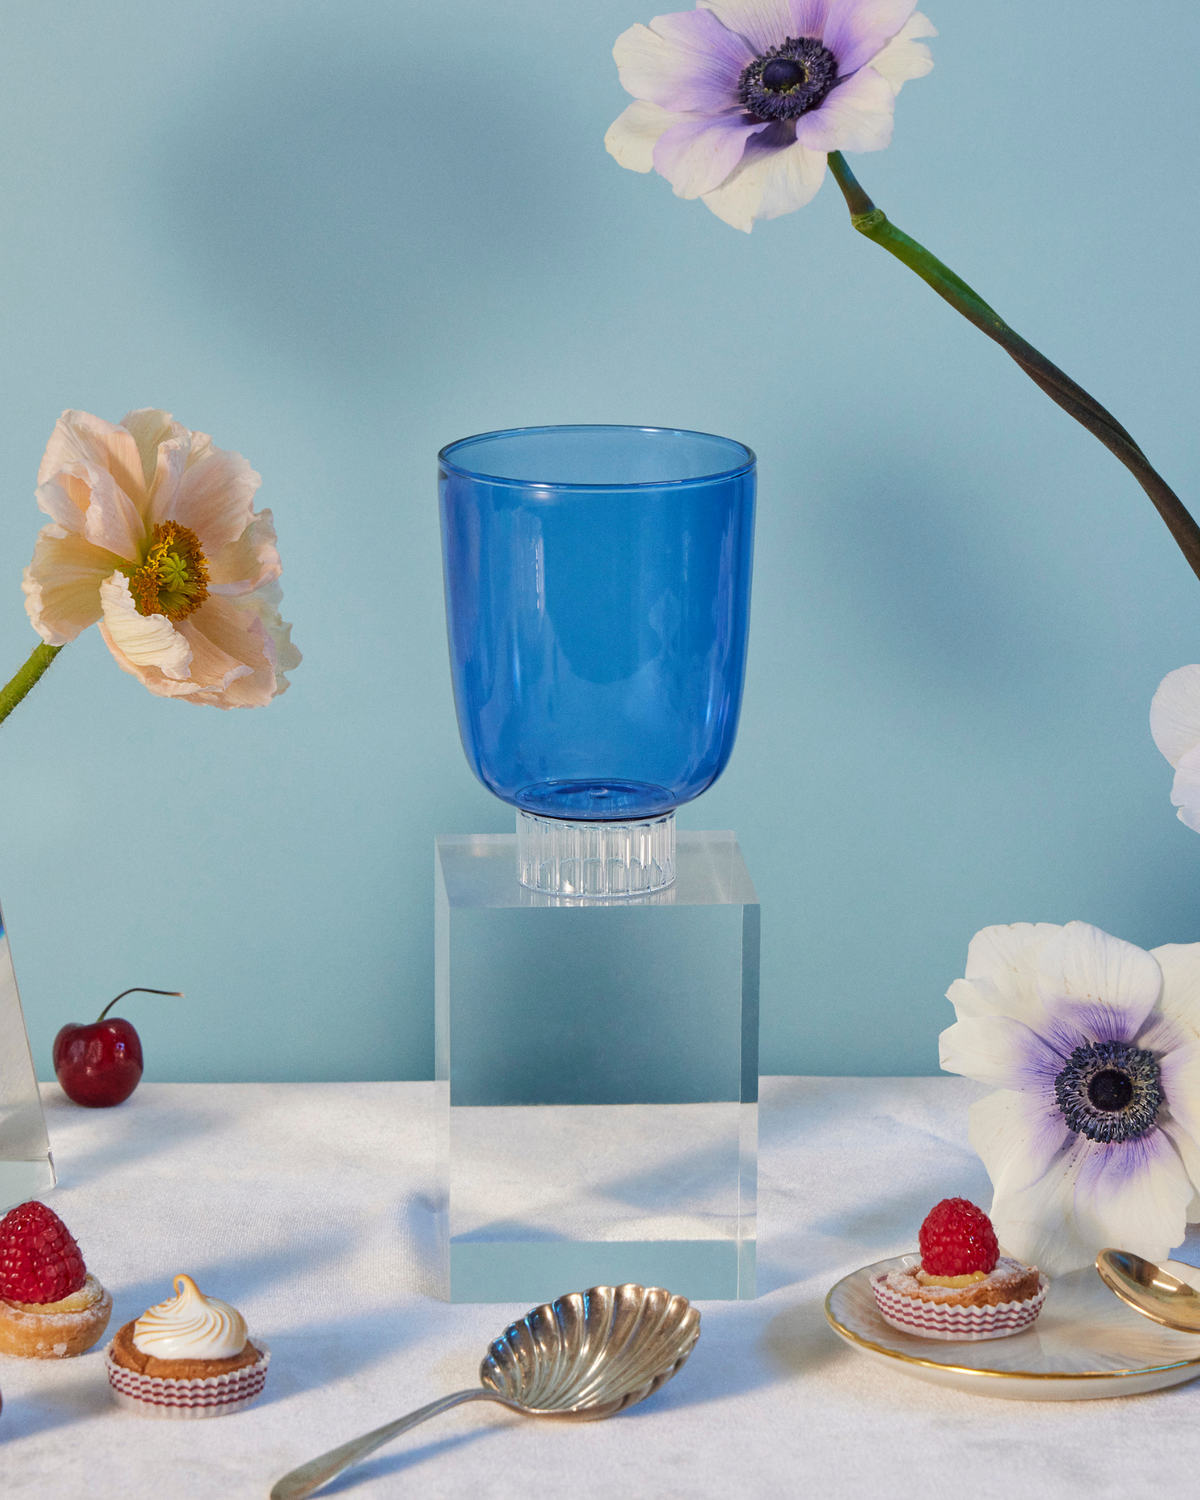 Set-of-four cobalt blue colored stemless wine glasses. A colored glass on a table with poppies and anemones flowers, cherries, raspberry tarts, rose strawberries, and grapes. 